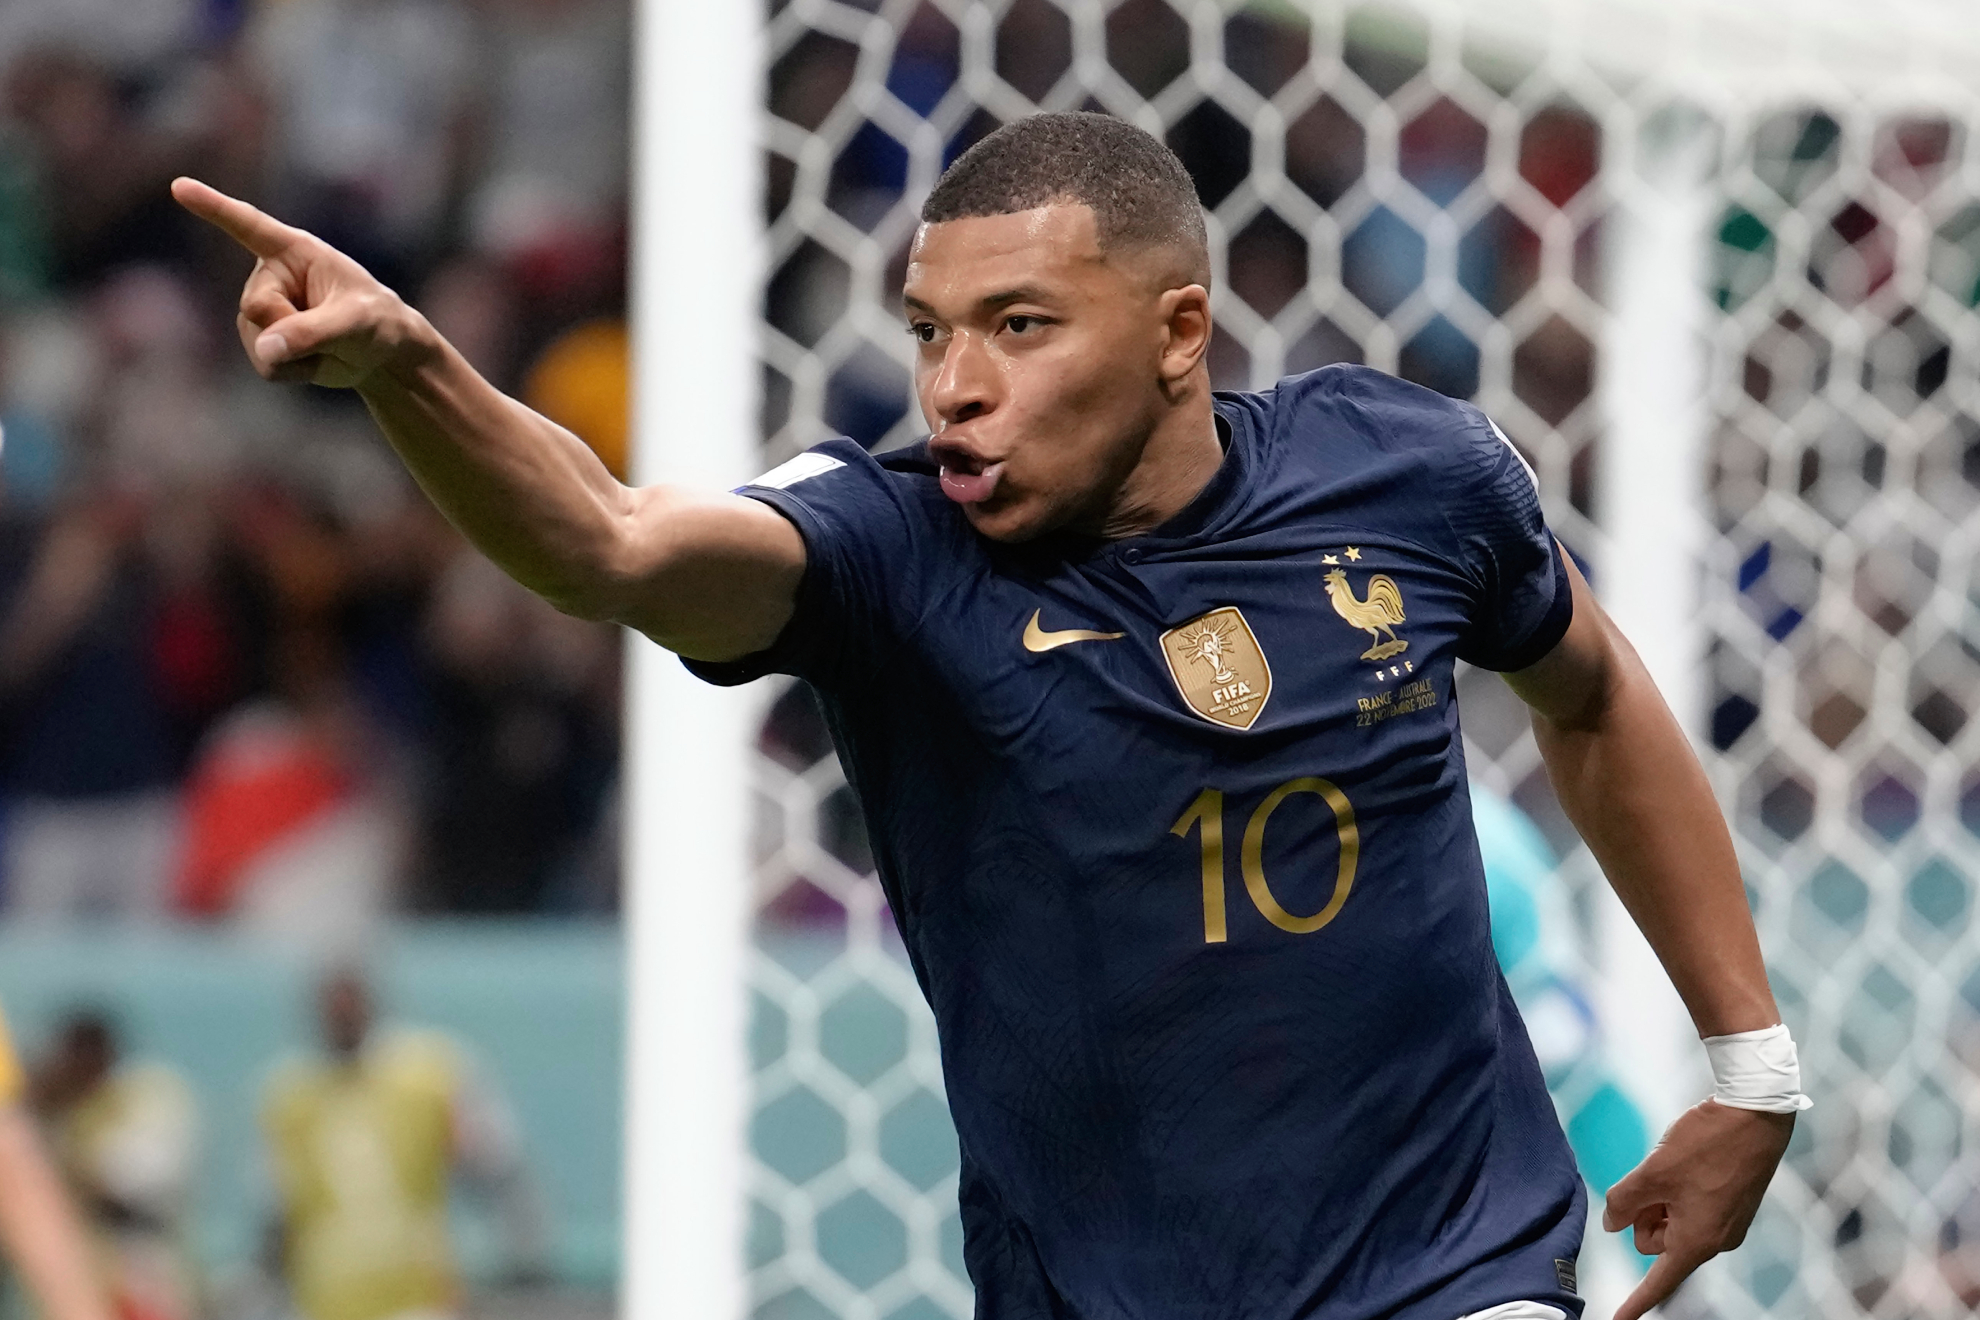 Ex-PSG player questions Mbappe's France captaincy credentials